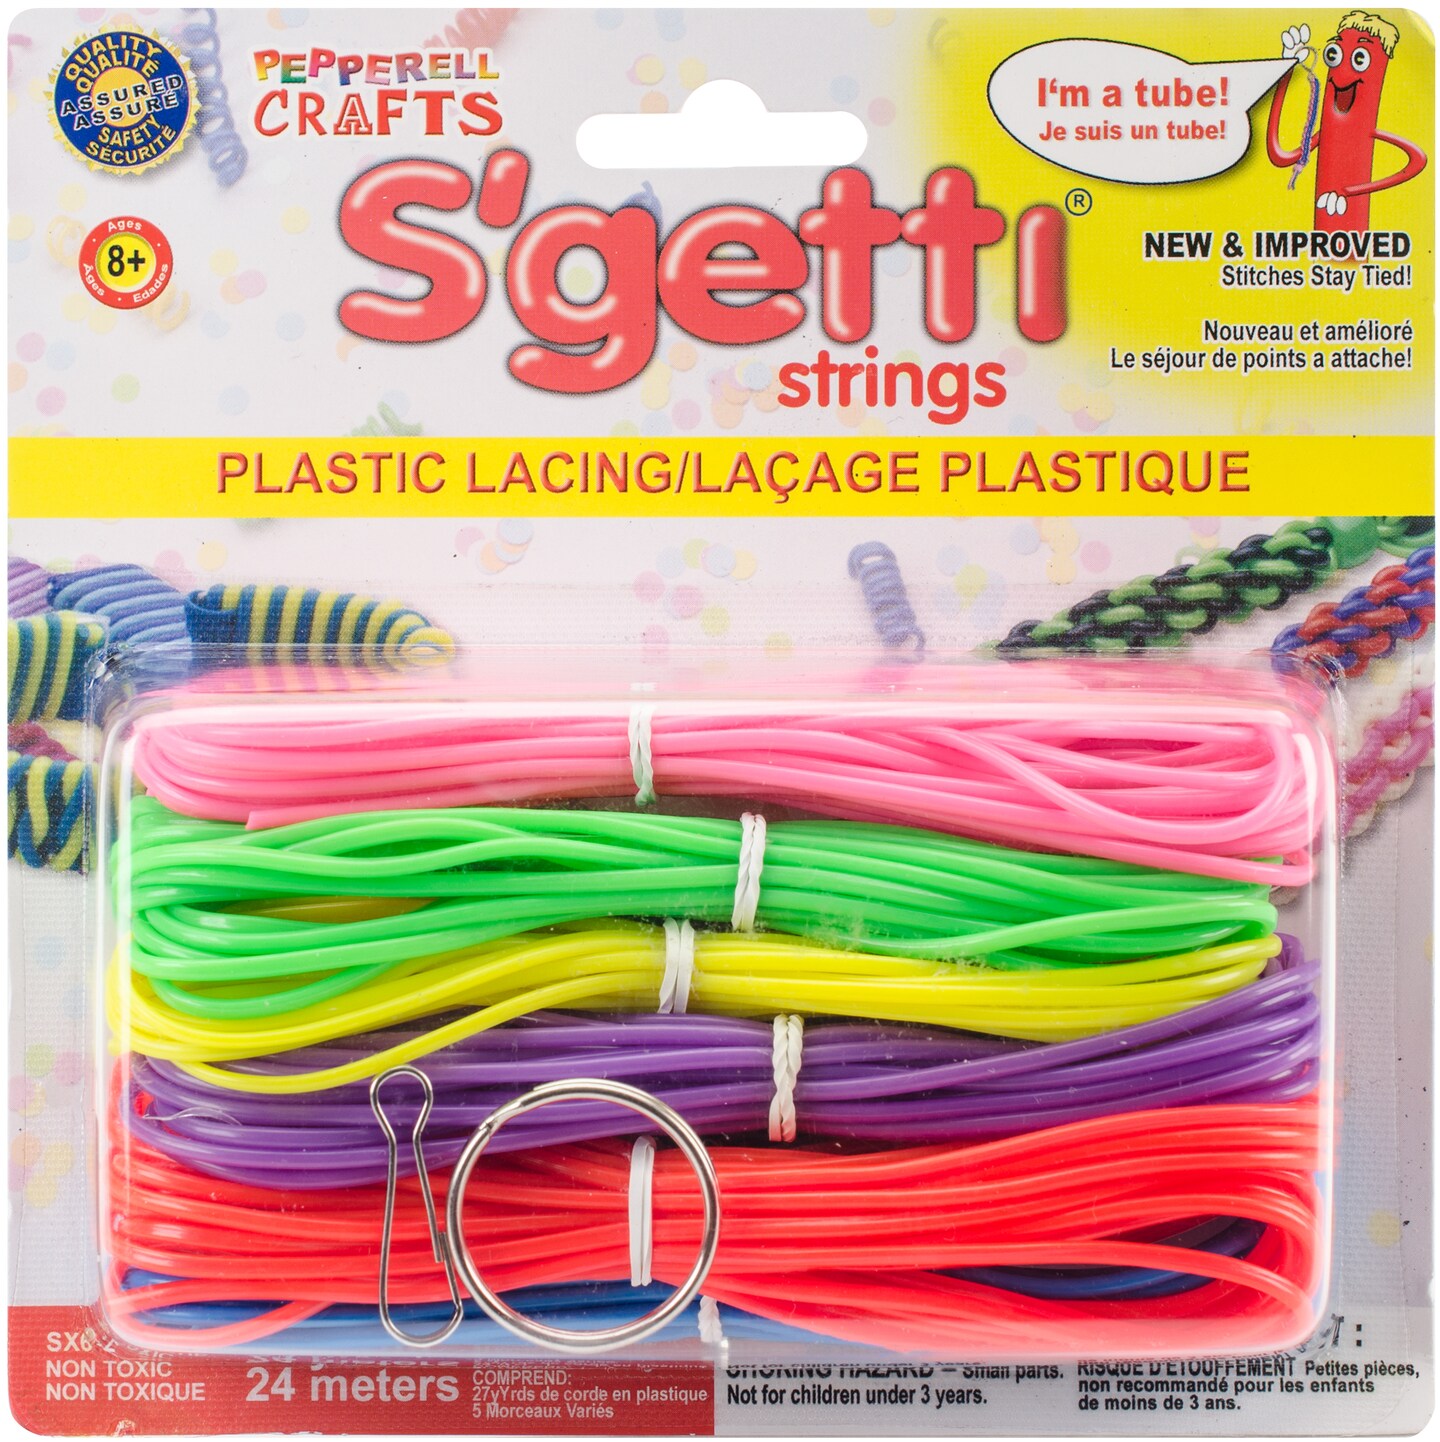 Pepperell S'getti Strings Plastic Lacing 27yd-Neon